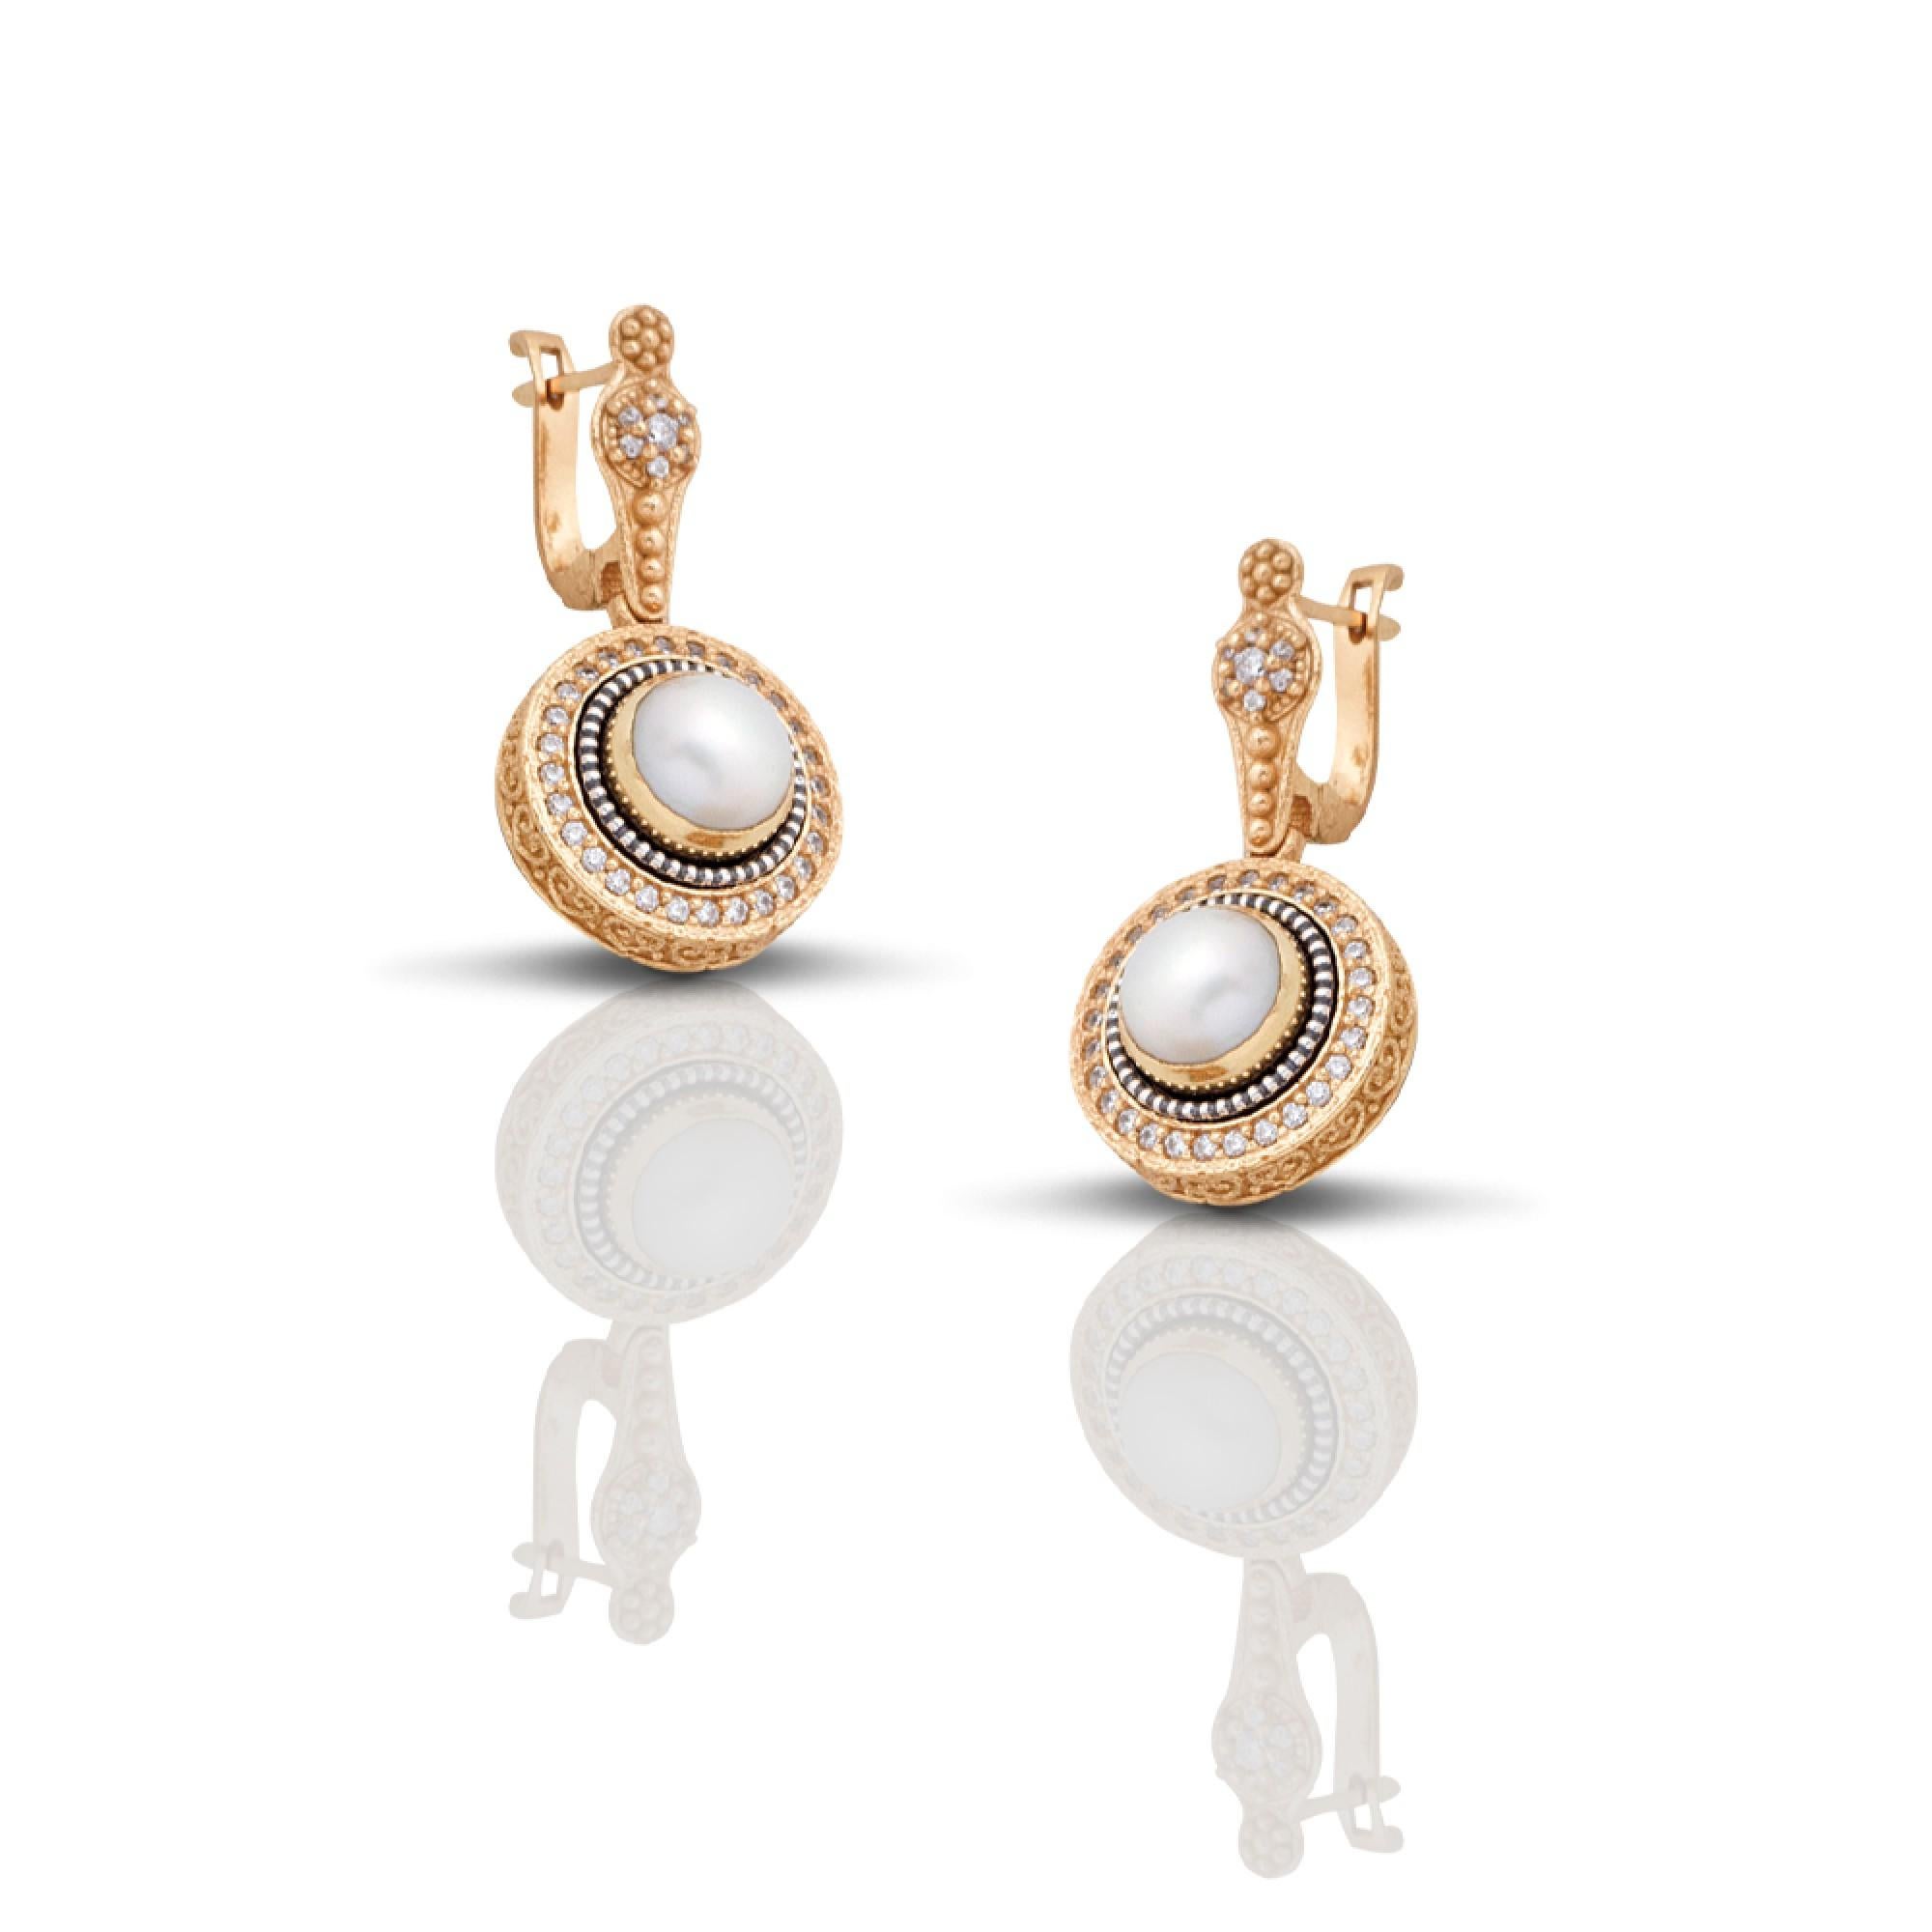 Cabochon Drop Earrings with Pearls and Zircon Stones, Dimitrios Exclusive S259 For Sale